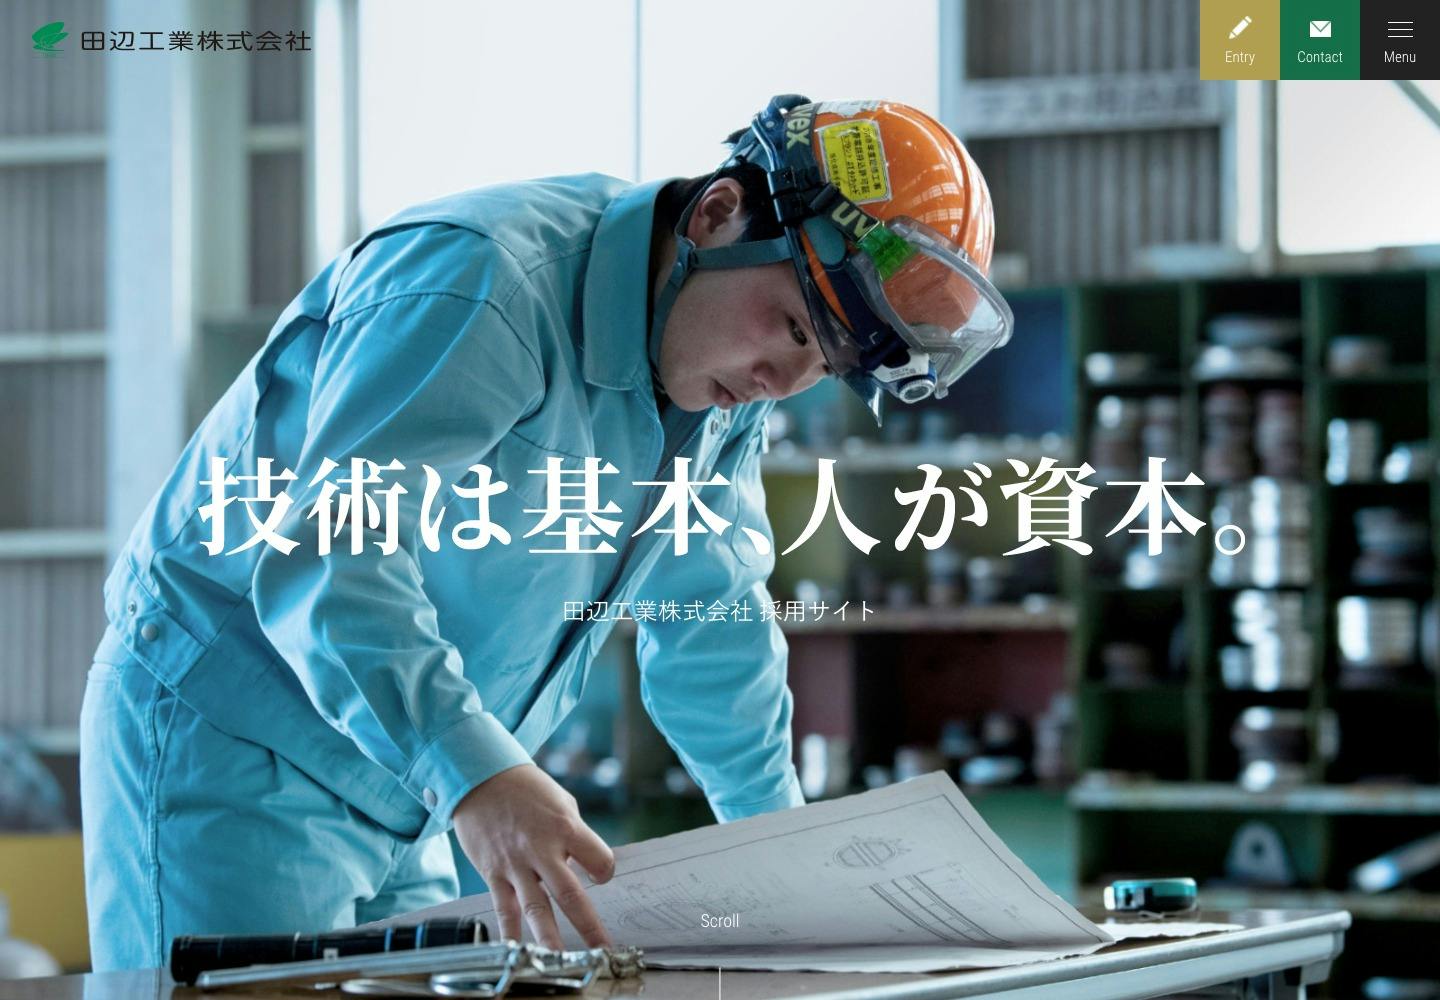 Cover Image for 田辺工業 採用情報ページ